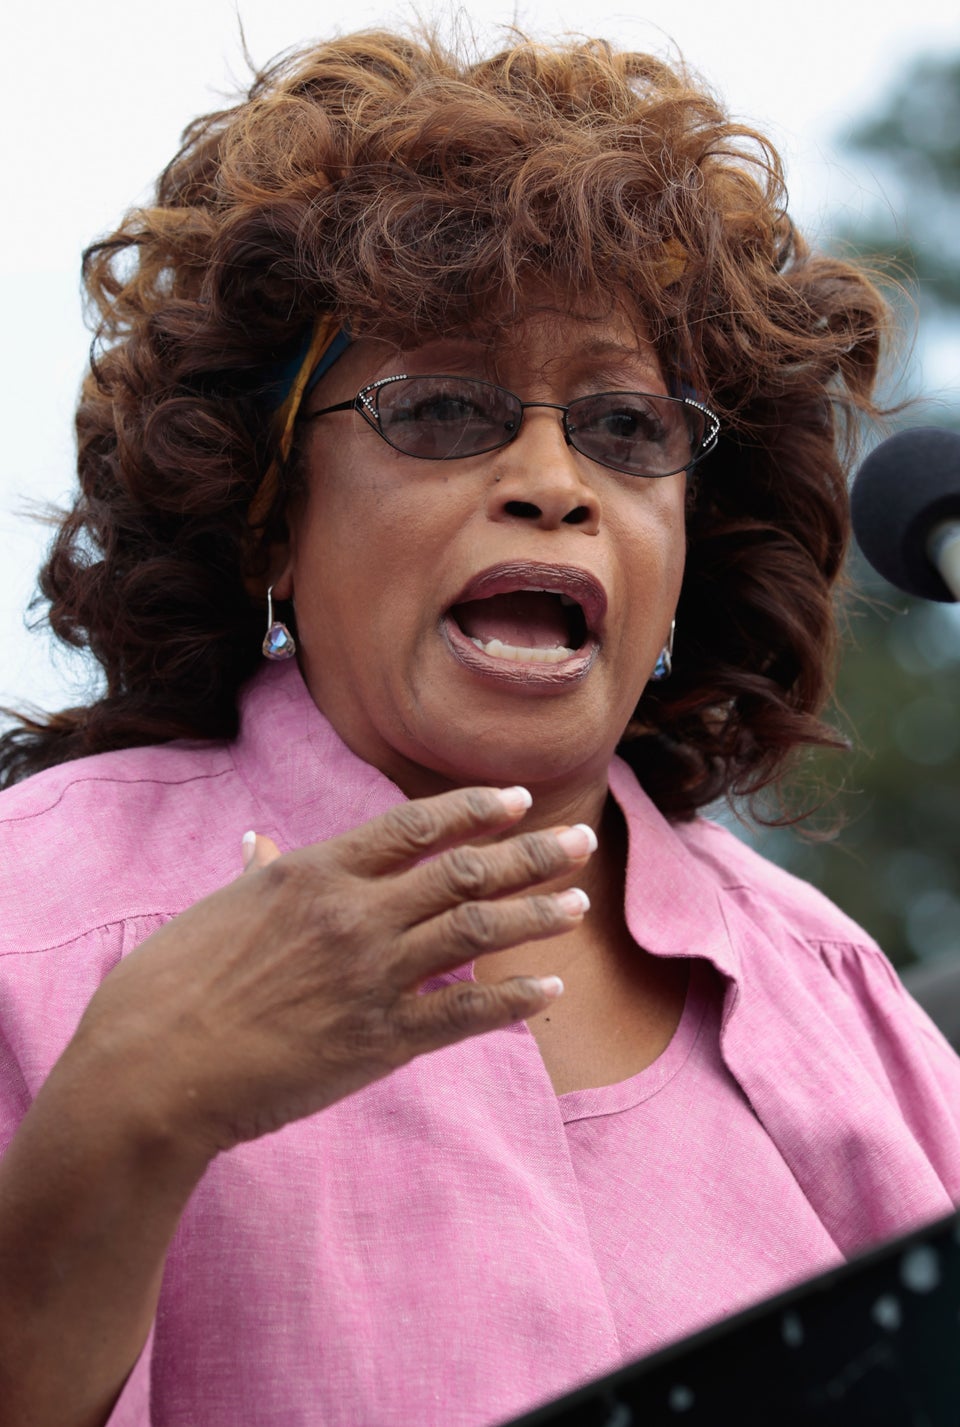 Former Congresswoman Corrine Brown Receives 5-Year Prison Sentence For Charity Scam